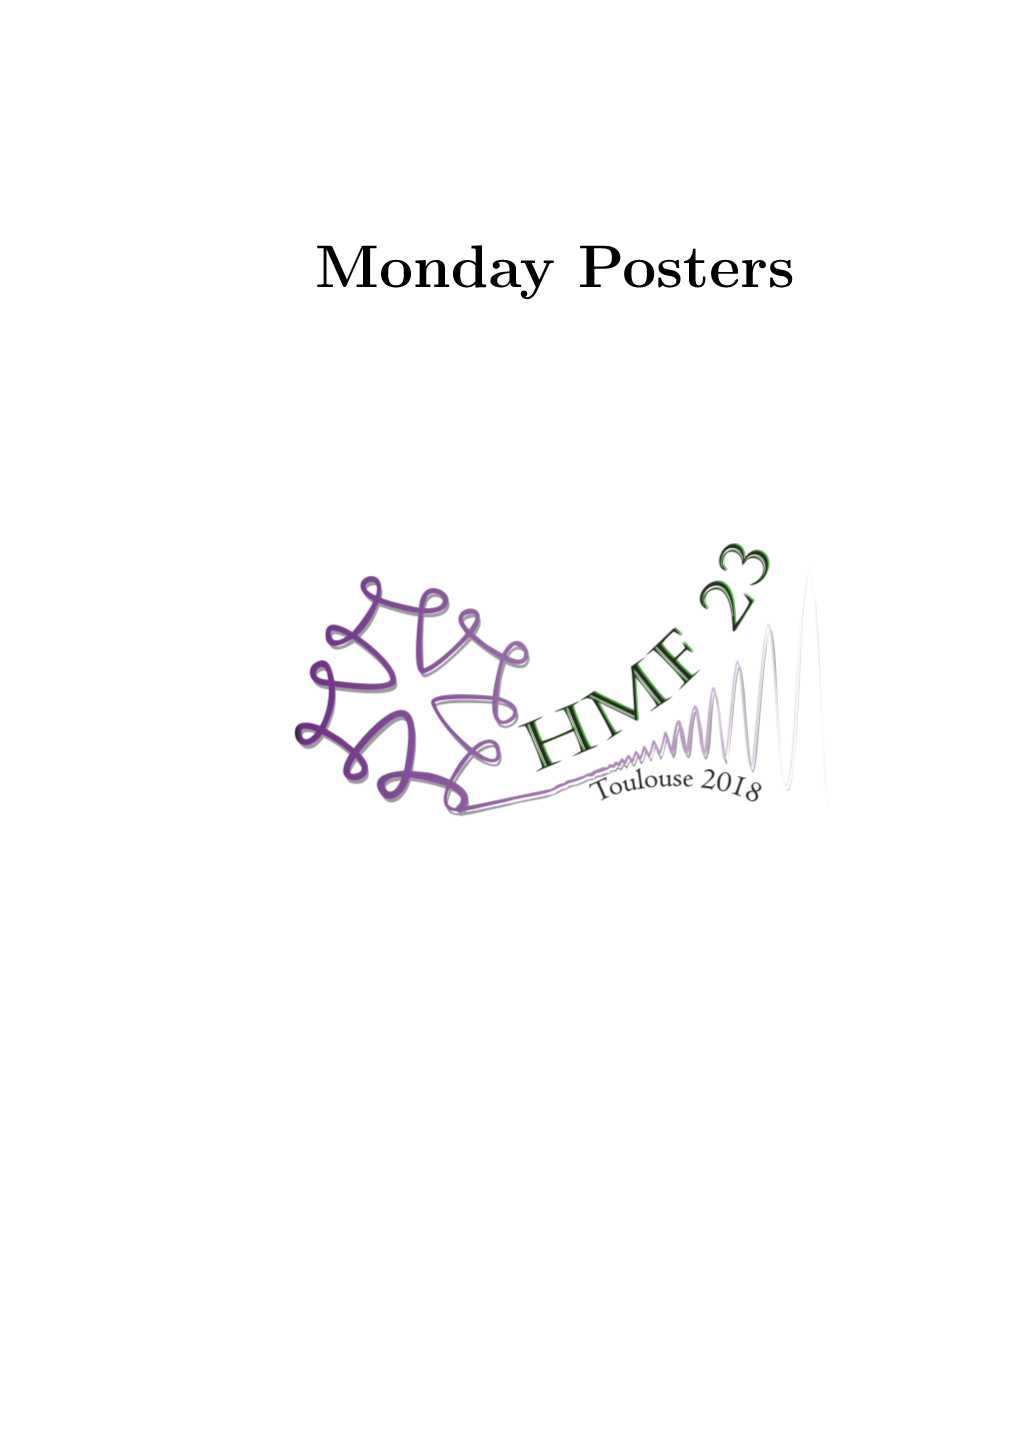 Abstracts Monday Poster Session